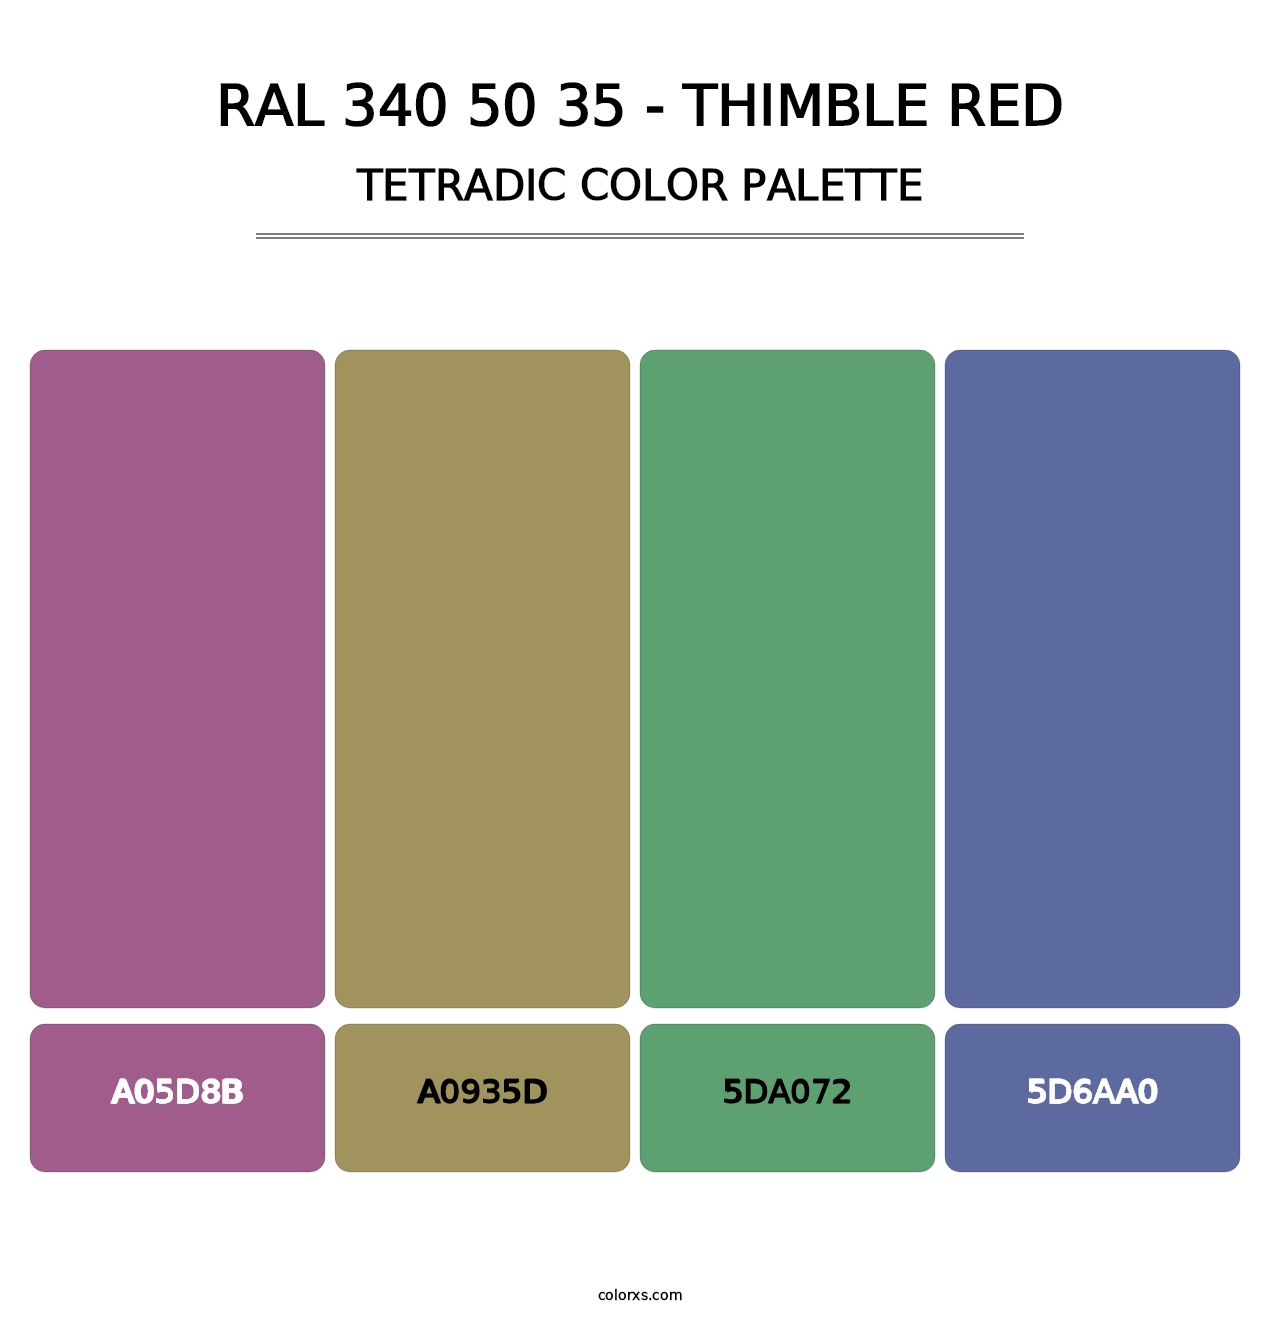 RAL 340 50 35 - Thimble Red - Tetradic Color Palette